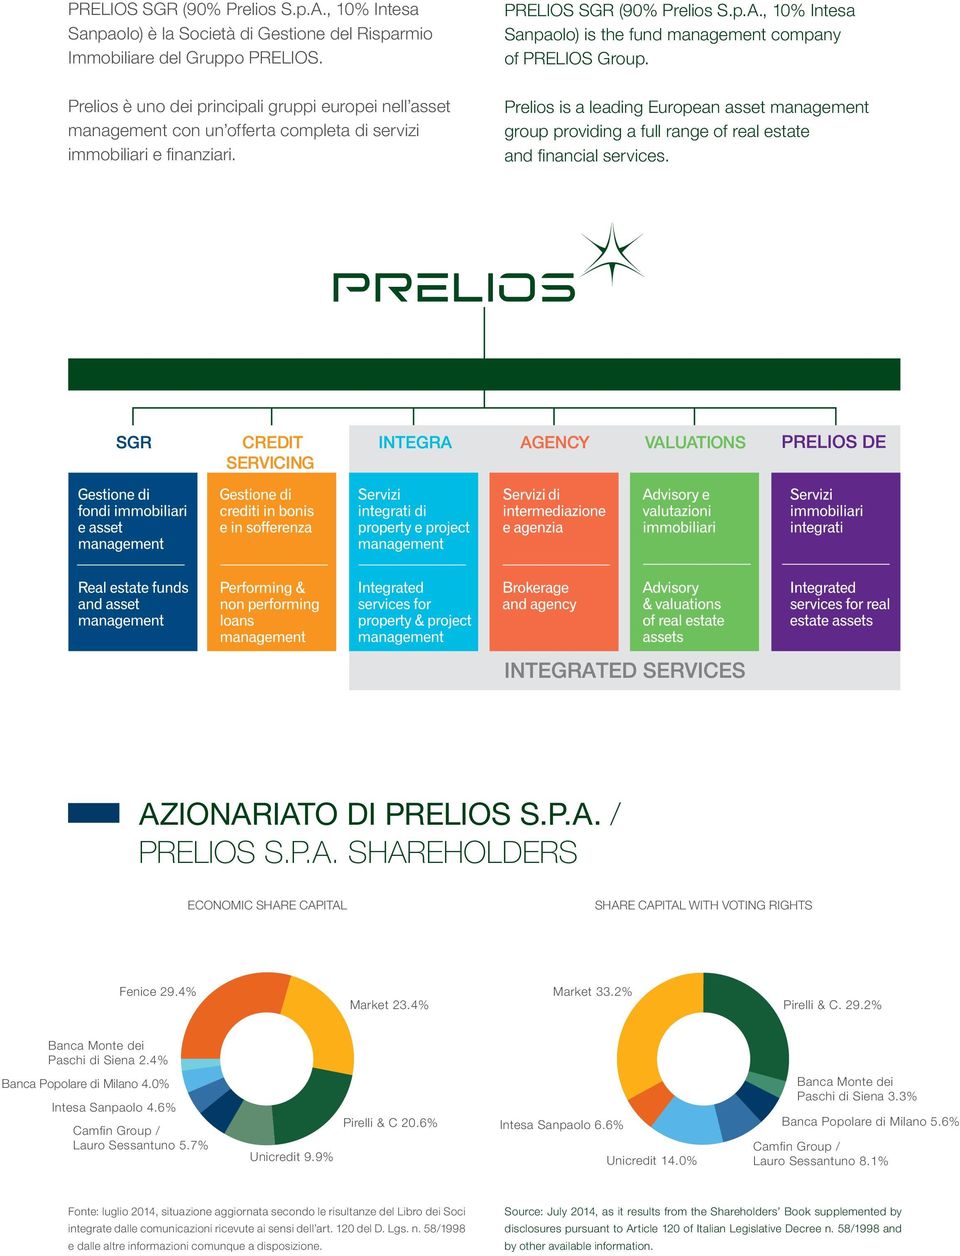 Prelios is a leading European asset management group providing a full range of real estate and financial services. azionariato di prelios s.p.a. / prelios s.p.a. shareholders ECONOMIC SHARE CAPITAL SHARE CAPITAL WITH VOTING RIGHTS Fenice 29.